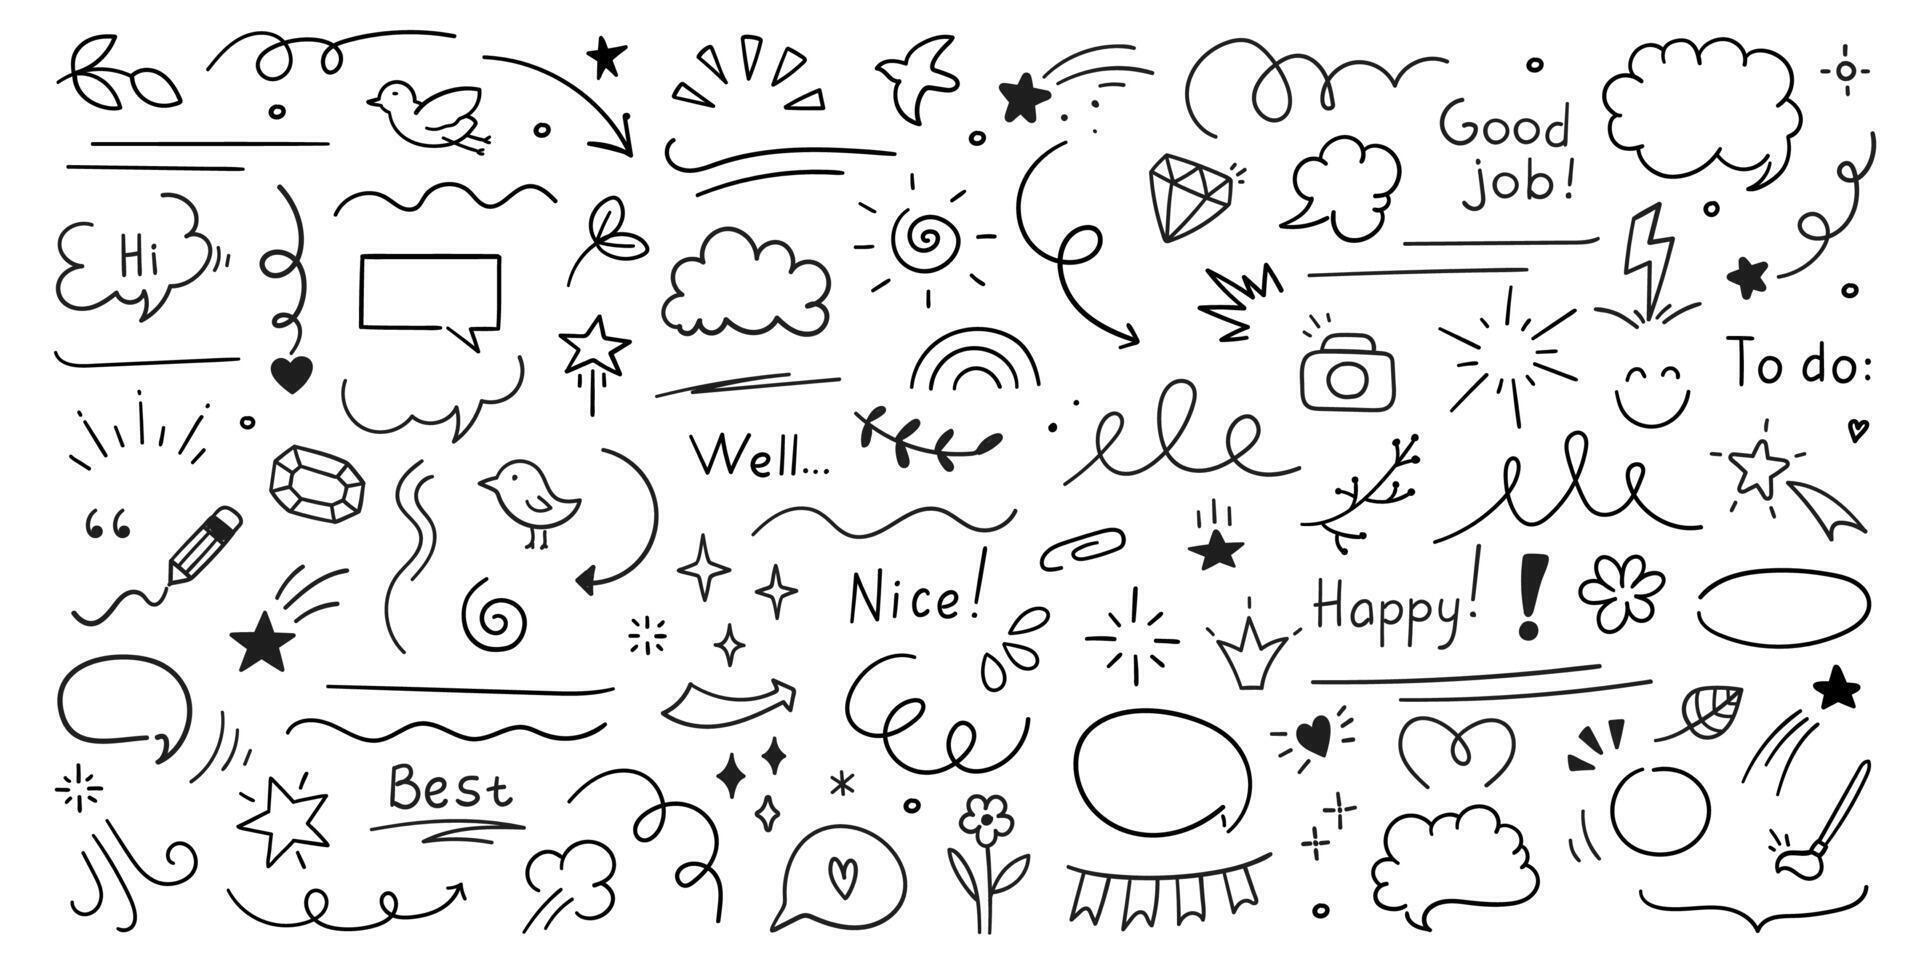 Cute Doodle pen line elements. Heart, bubble, doodle, arrow, star, icon, shiny ornaments set. Simple drawing in line style sketch, attention, lettering, text, pattern elements. Vector illustration.